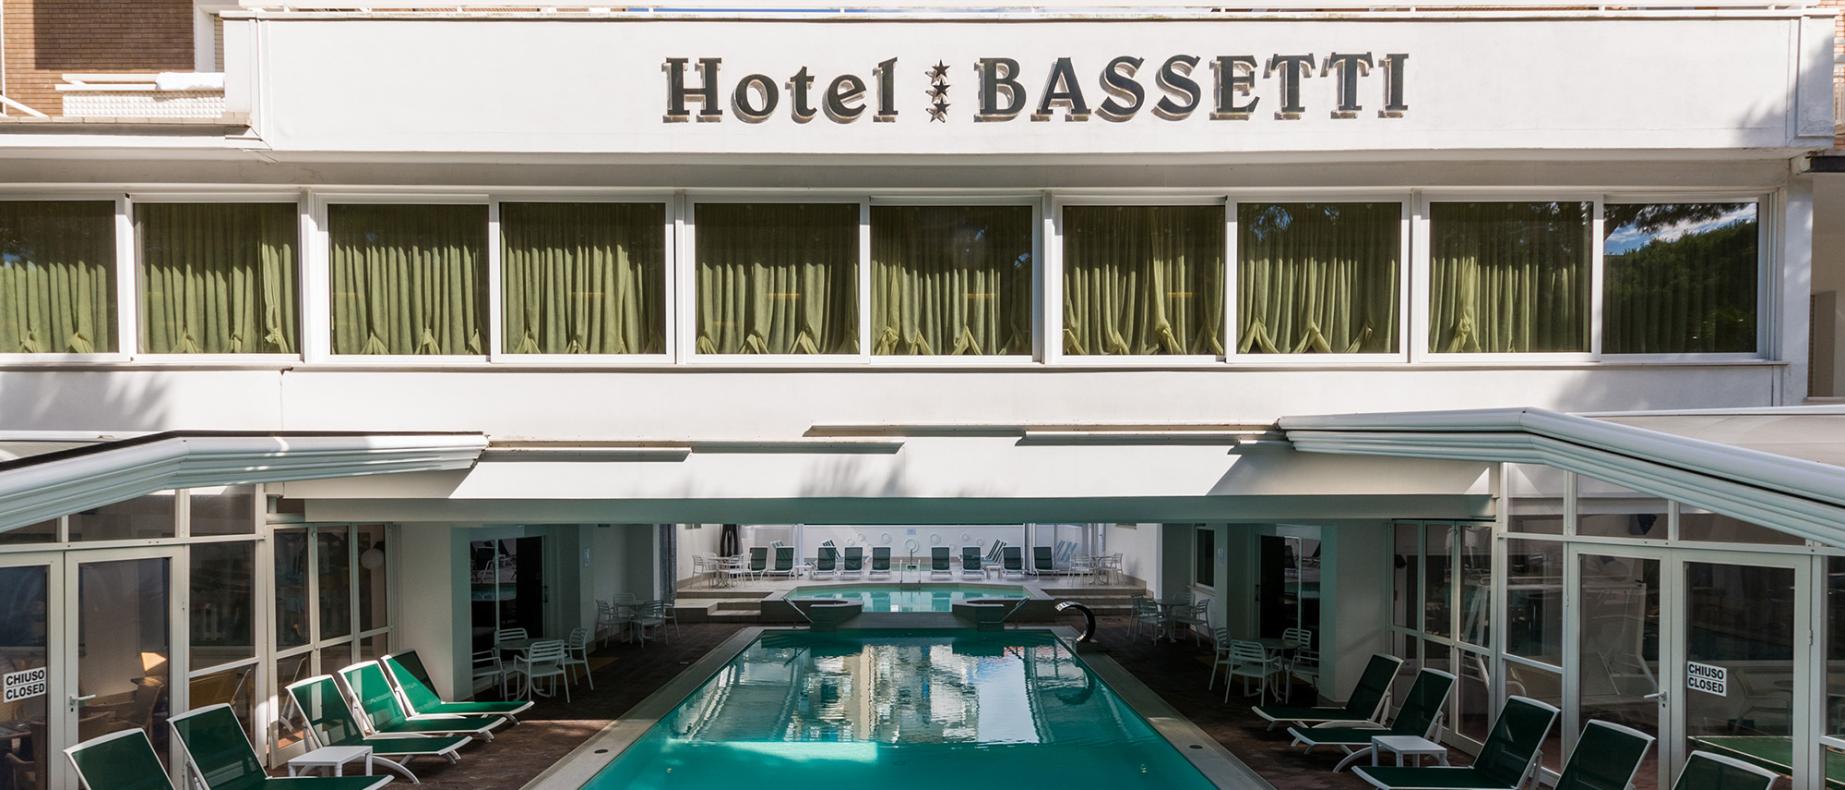 hotelbassetti en 1-en-269245-the-right-place-for-both-family-fun-and-relaxation-as-a-couple-choose-pinarella-at-the-end-of-june 003